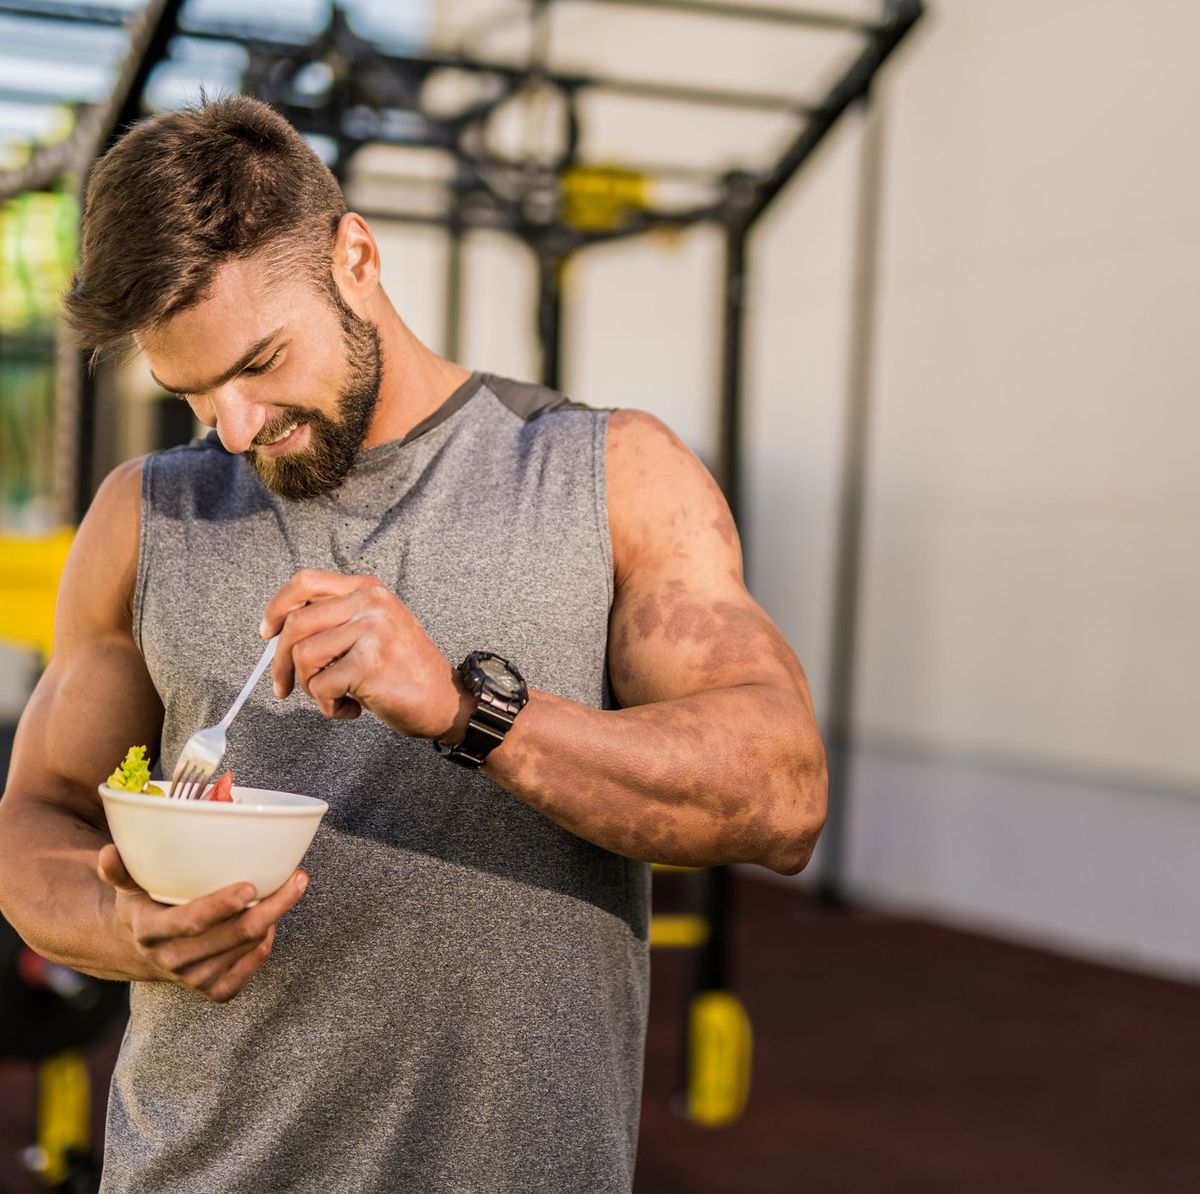 How To Make The Best Homemade Pre-Workout Recipes